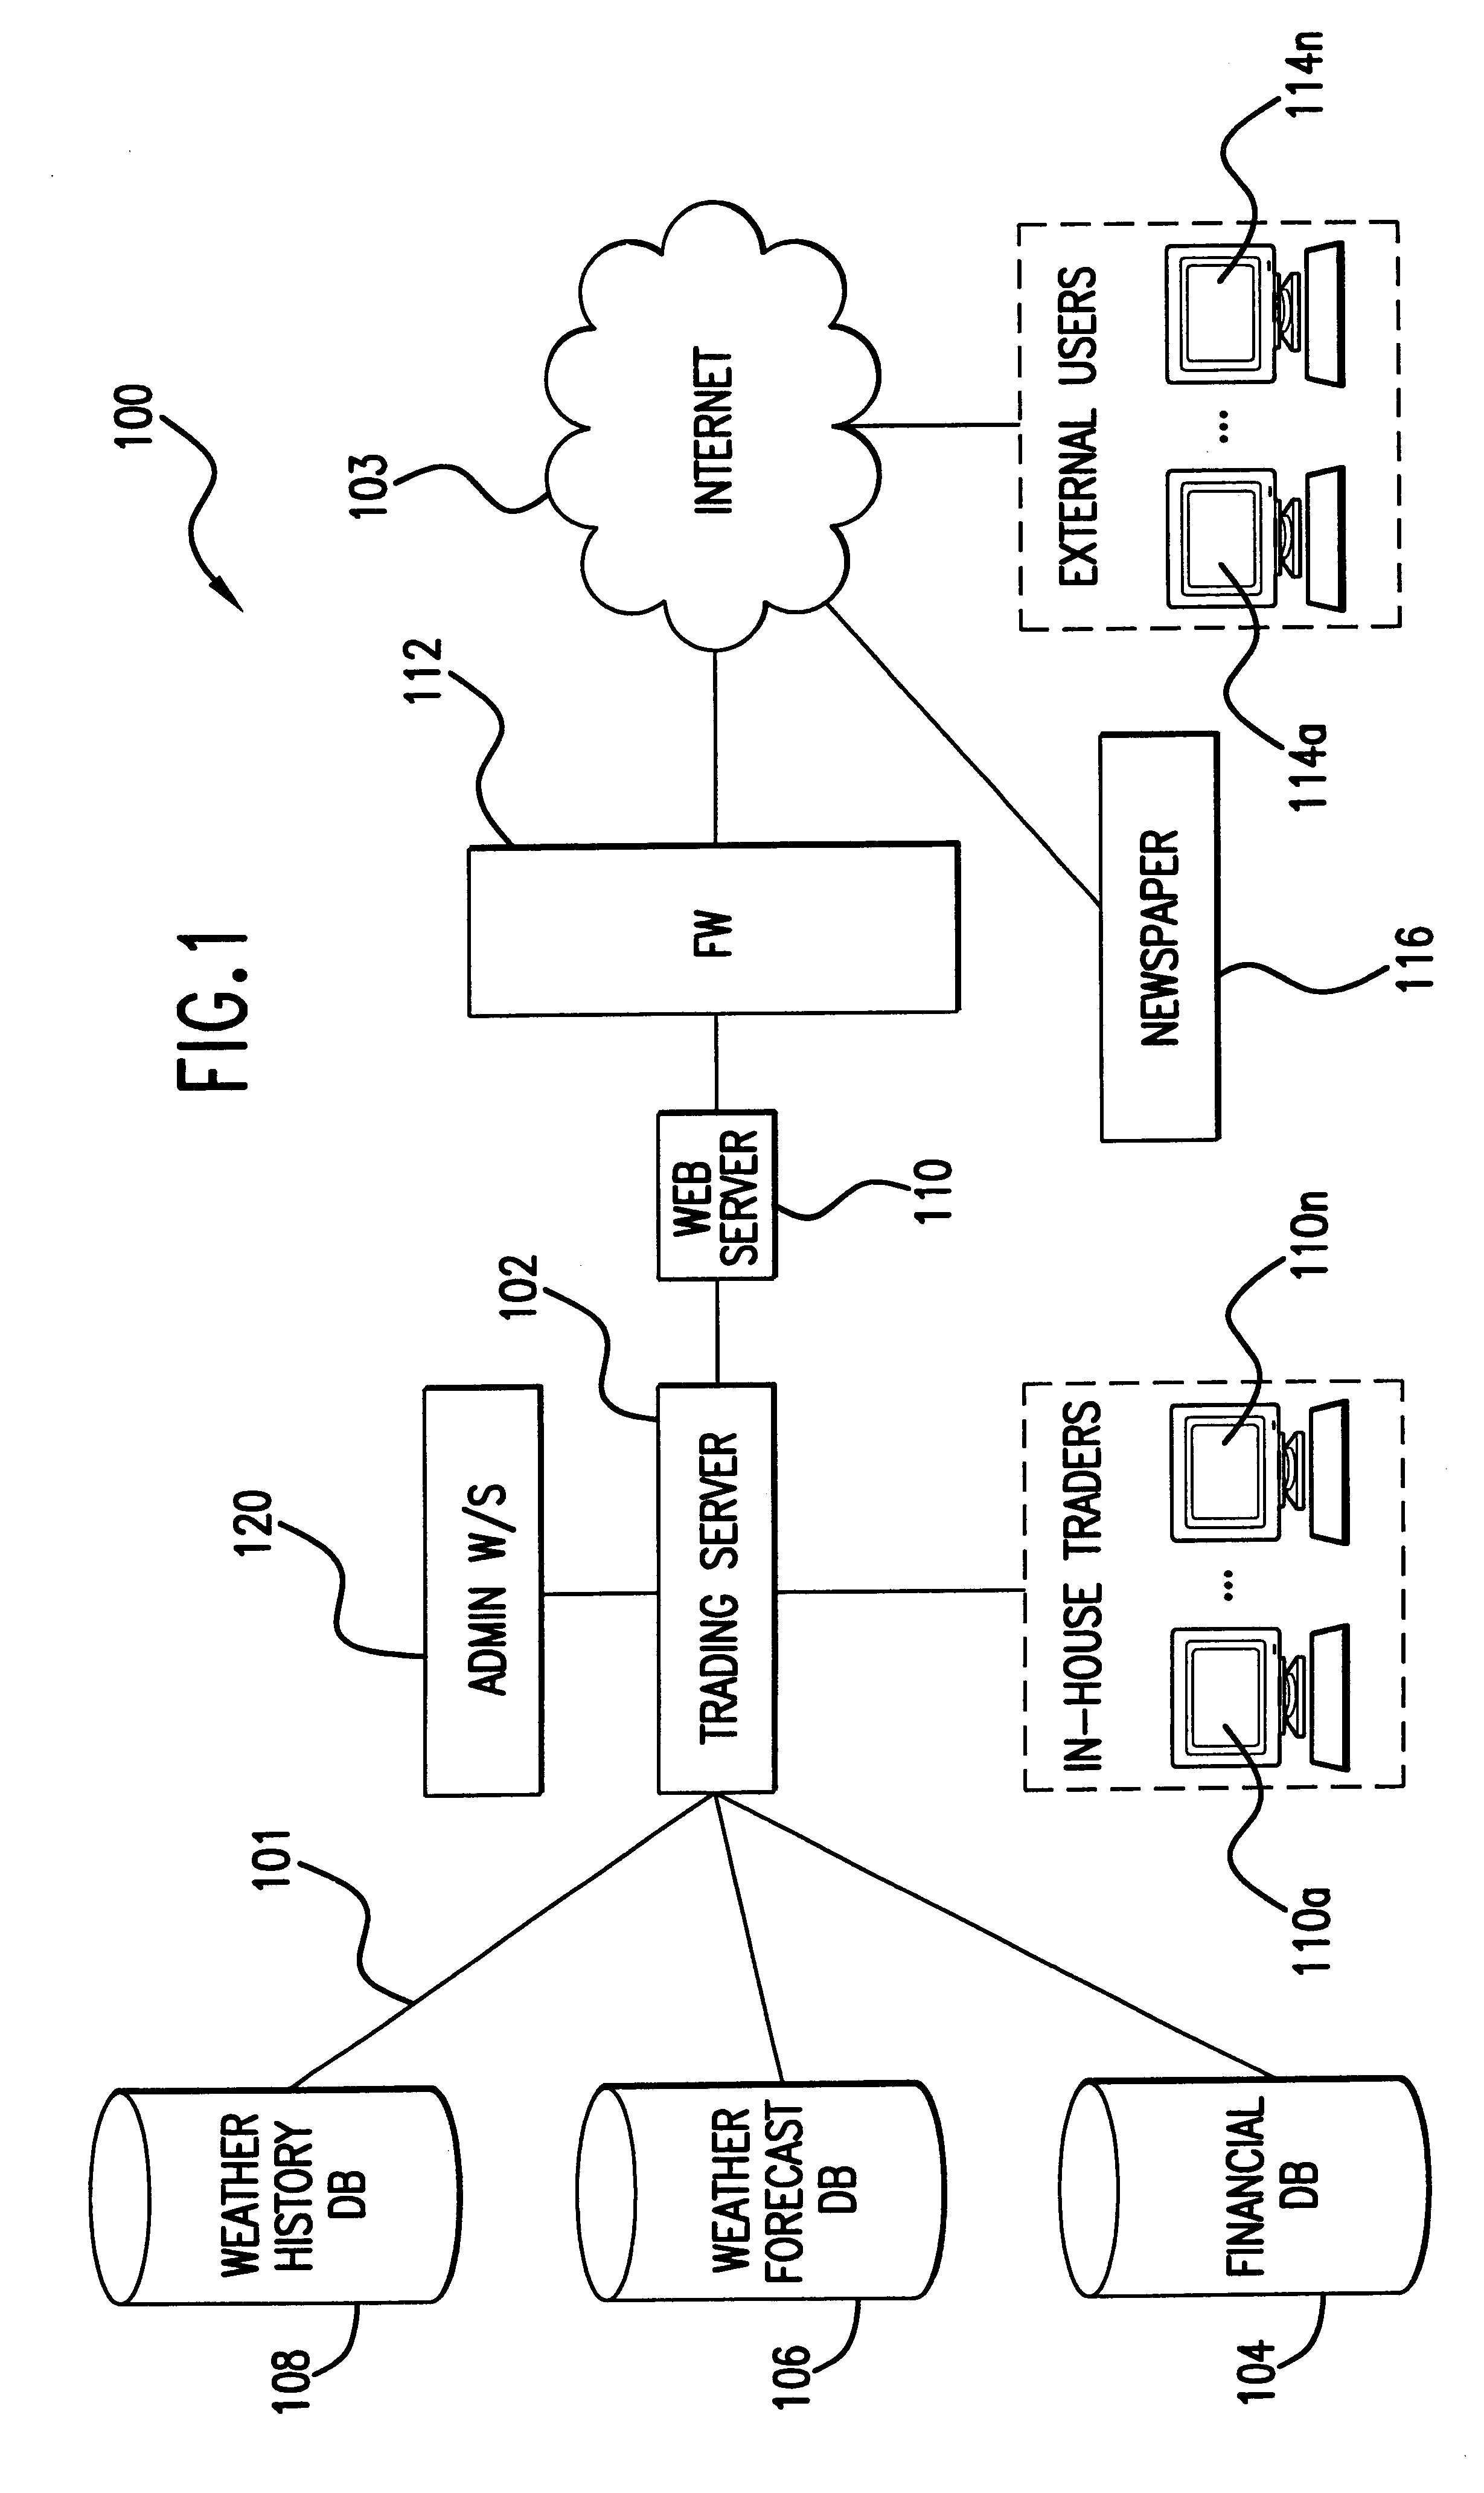 System, method, and computer program product for valuating weather-based financial instruments